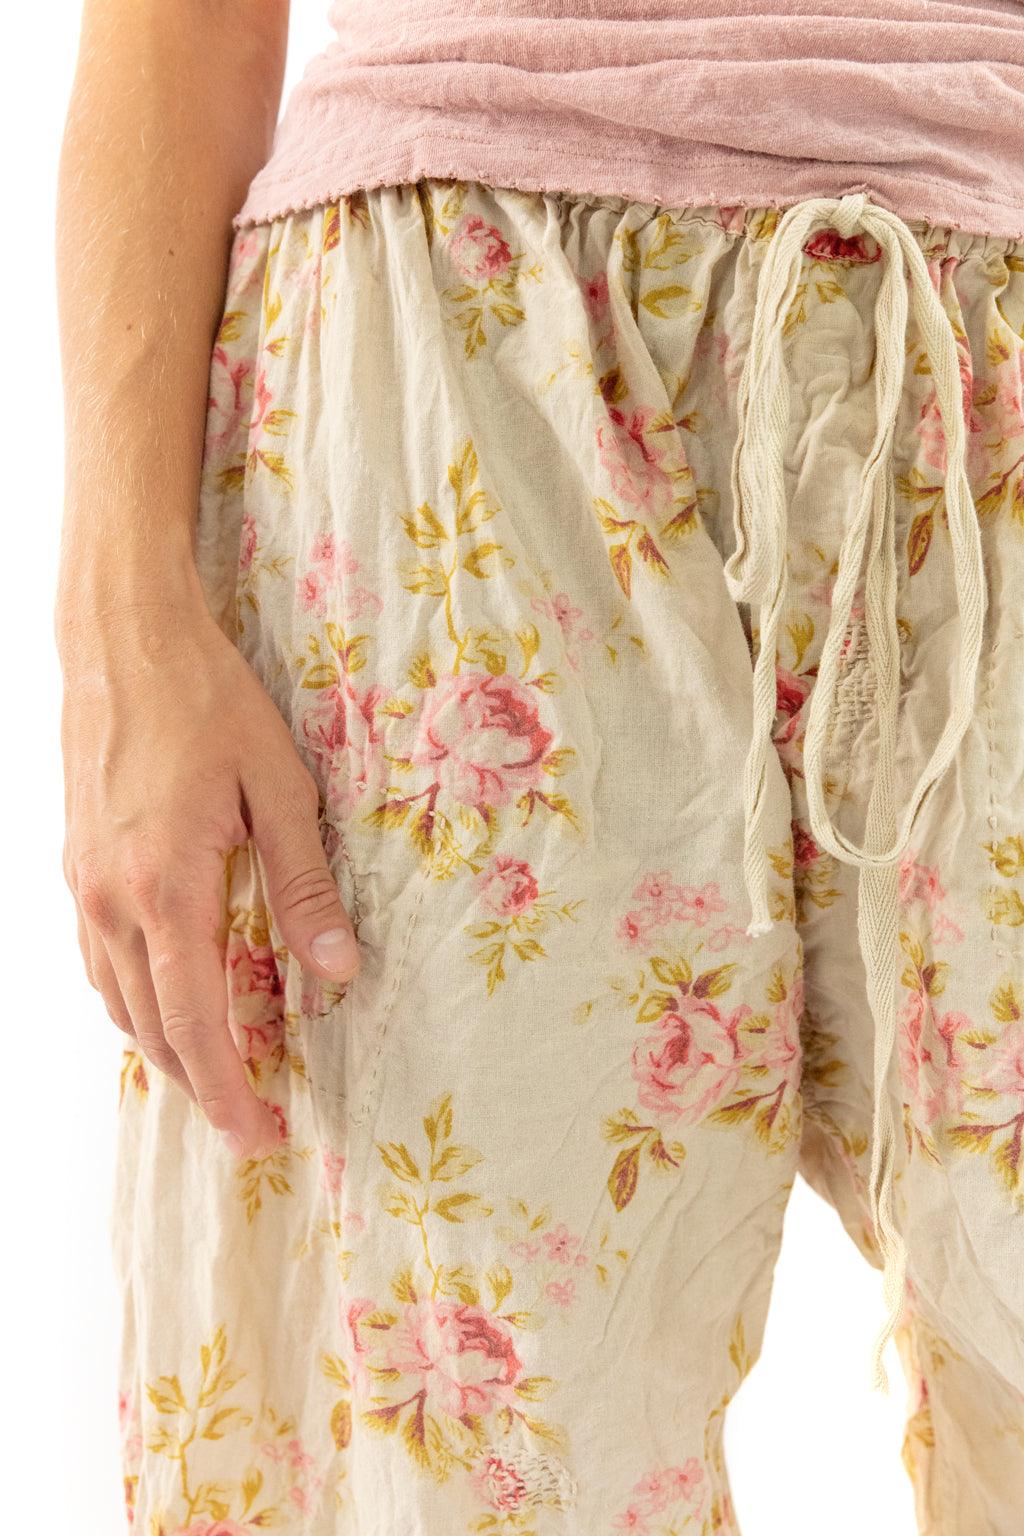 Floral Khloe Bloomers - Magnolia Pearl Clothing